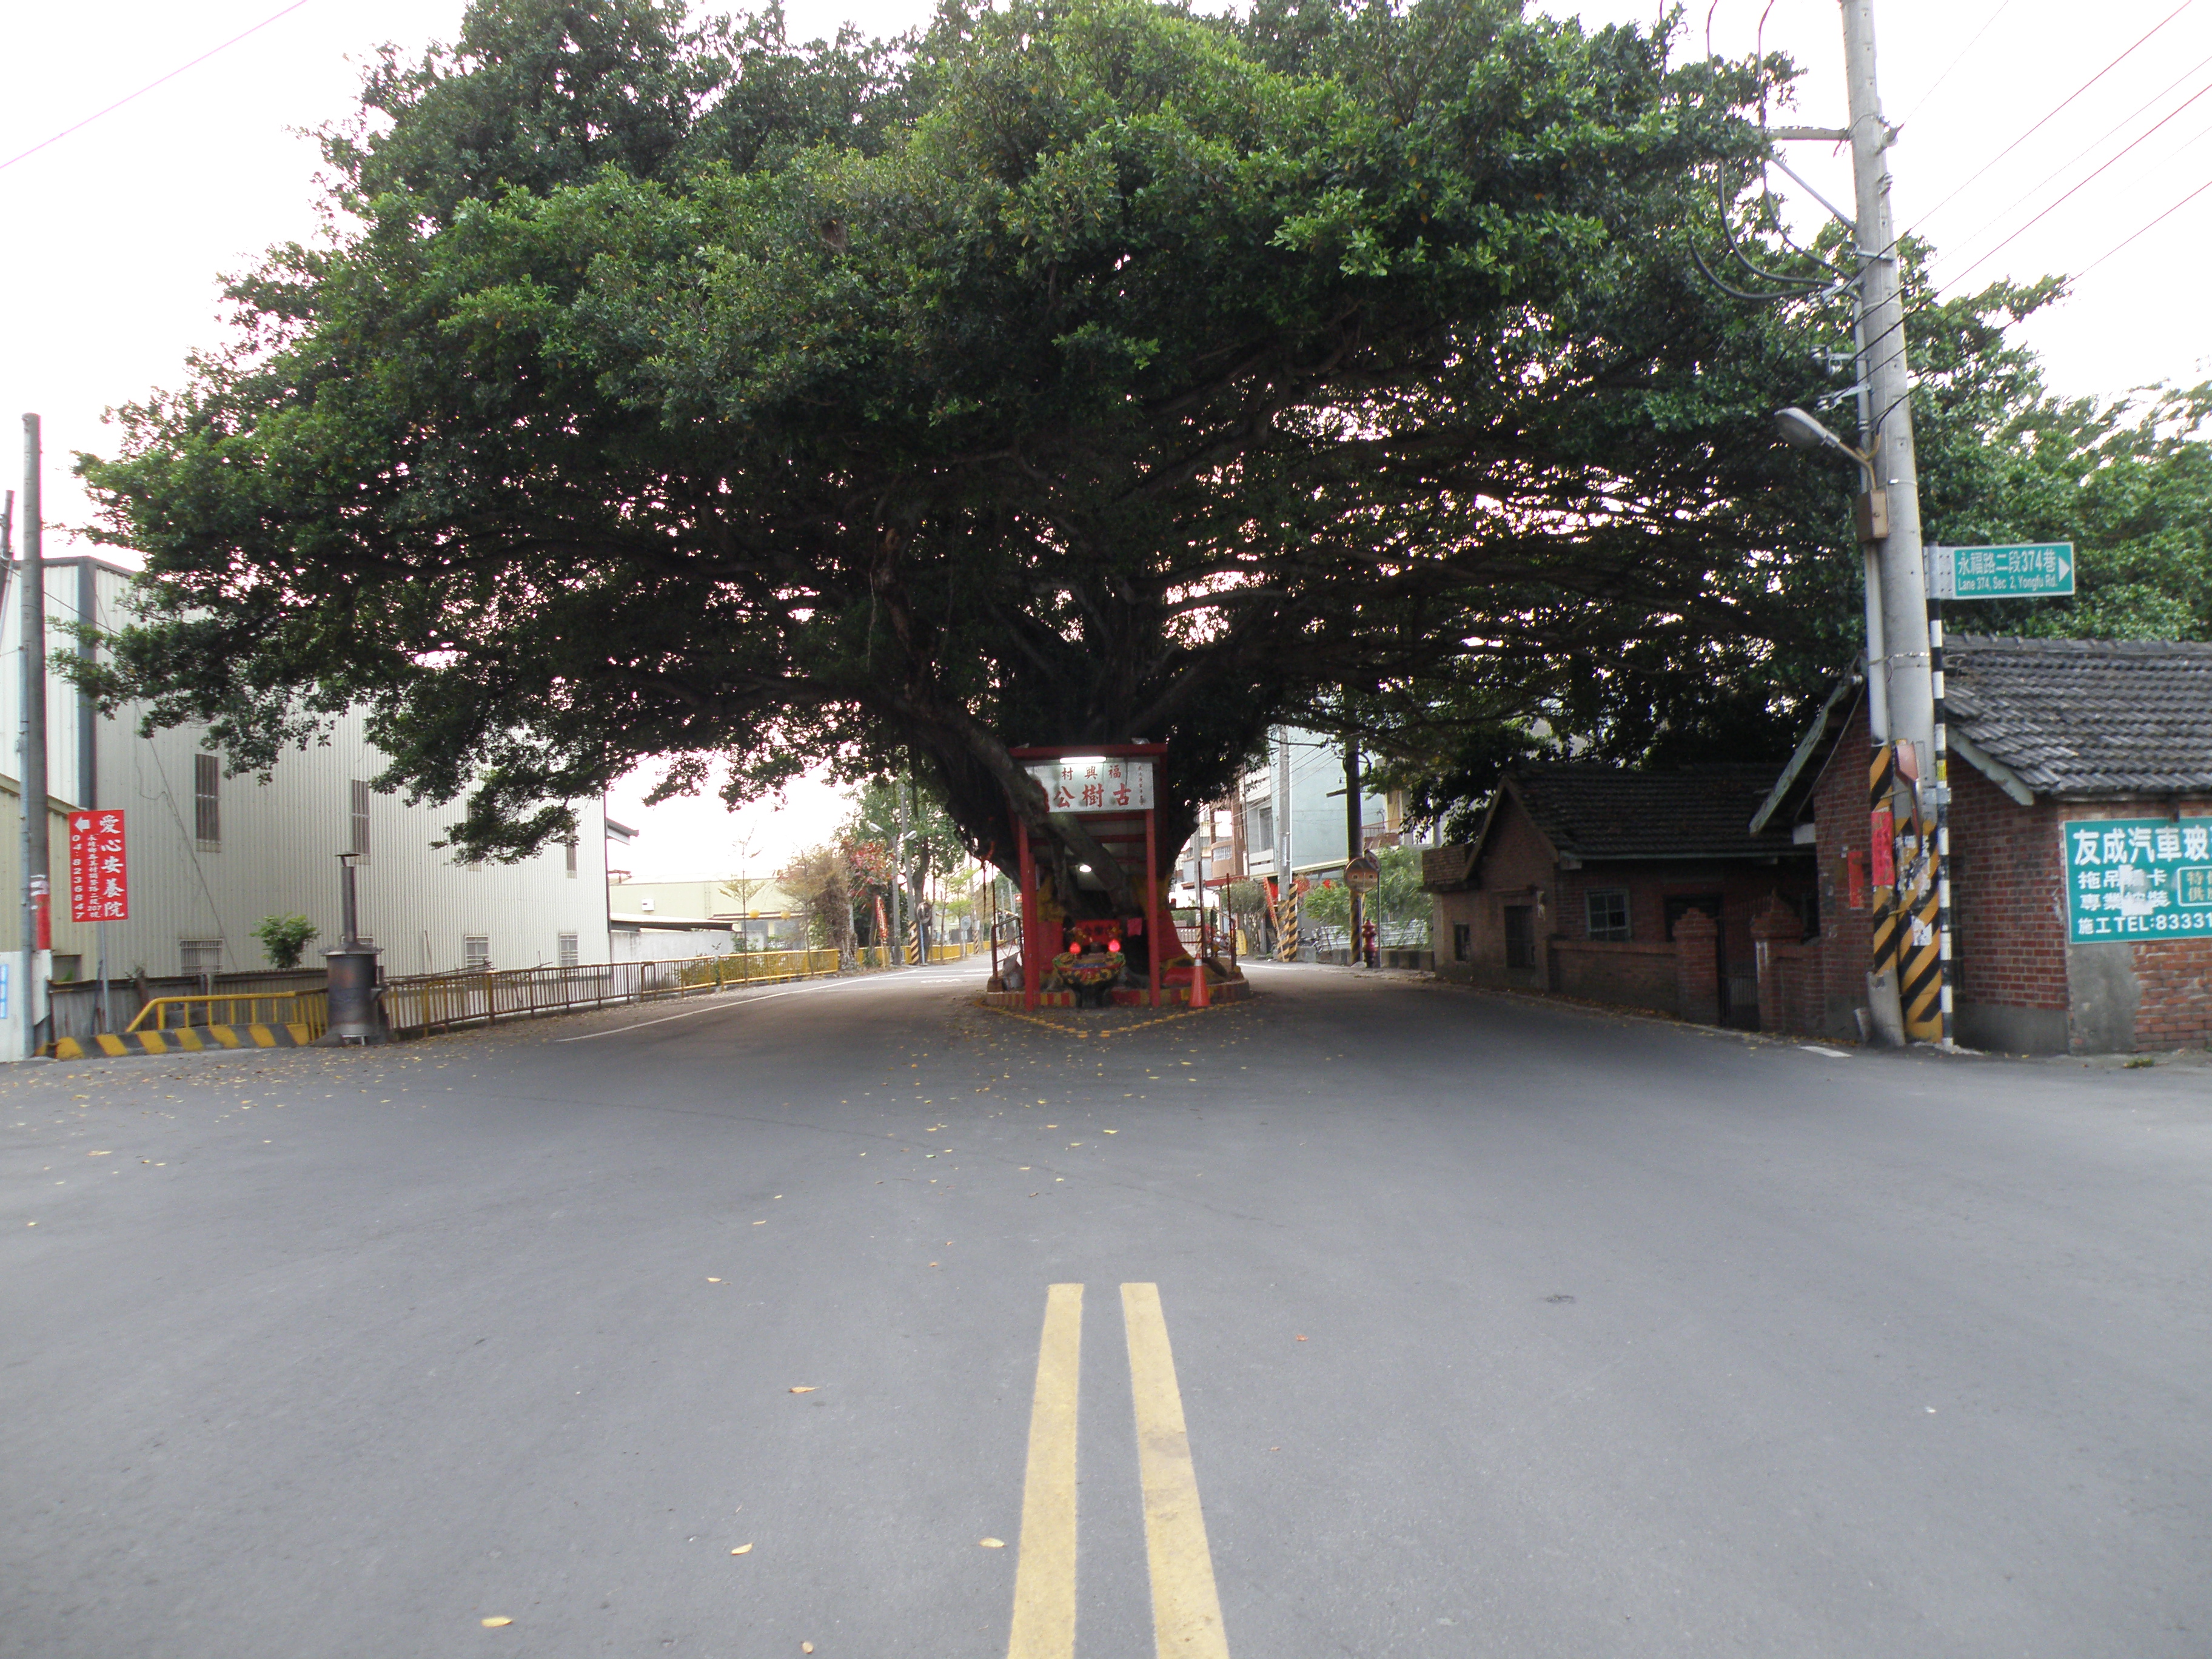 Tree temple in the middle of the road | Student of Asia